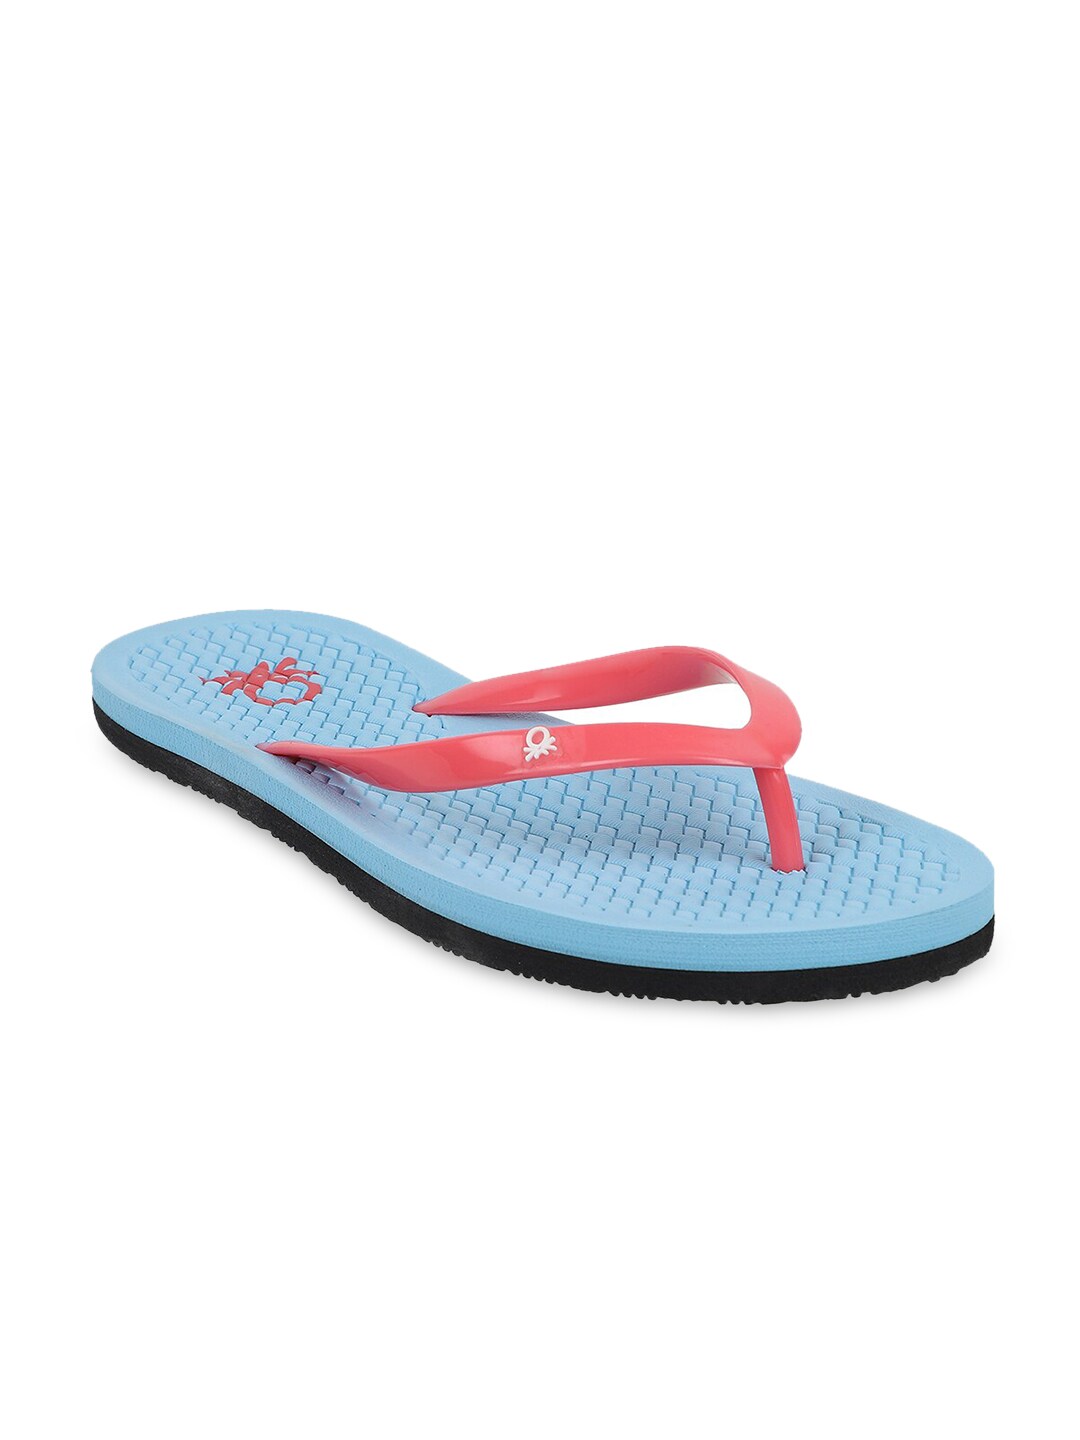 United Colors of Benetton Women Blue & Peach-Coloured Printed Rubber Thong Flip-Flops Price in India